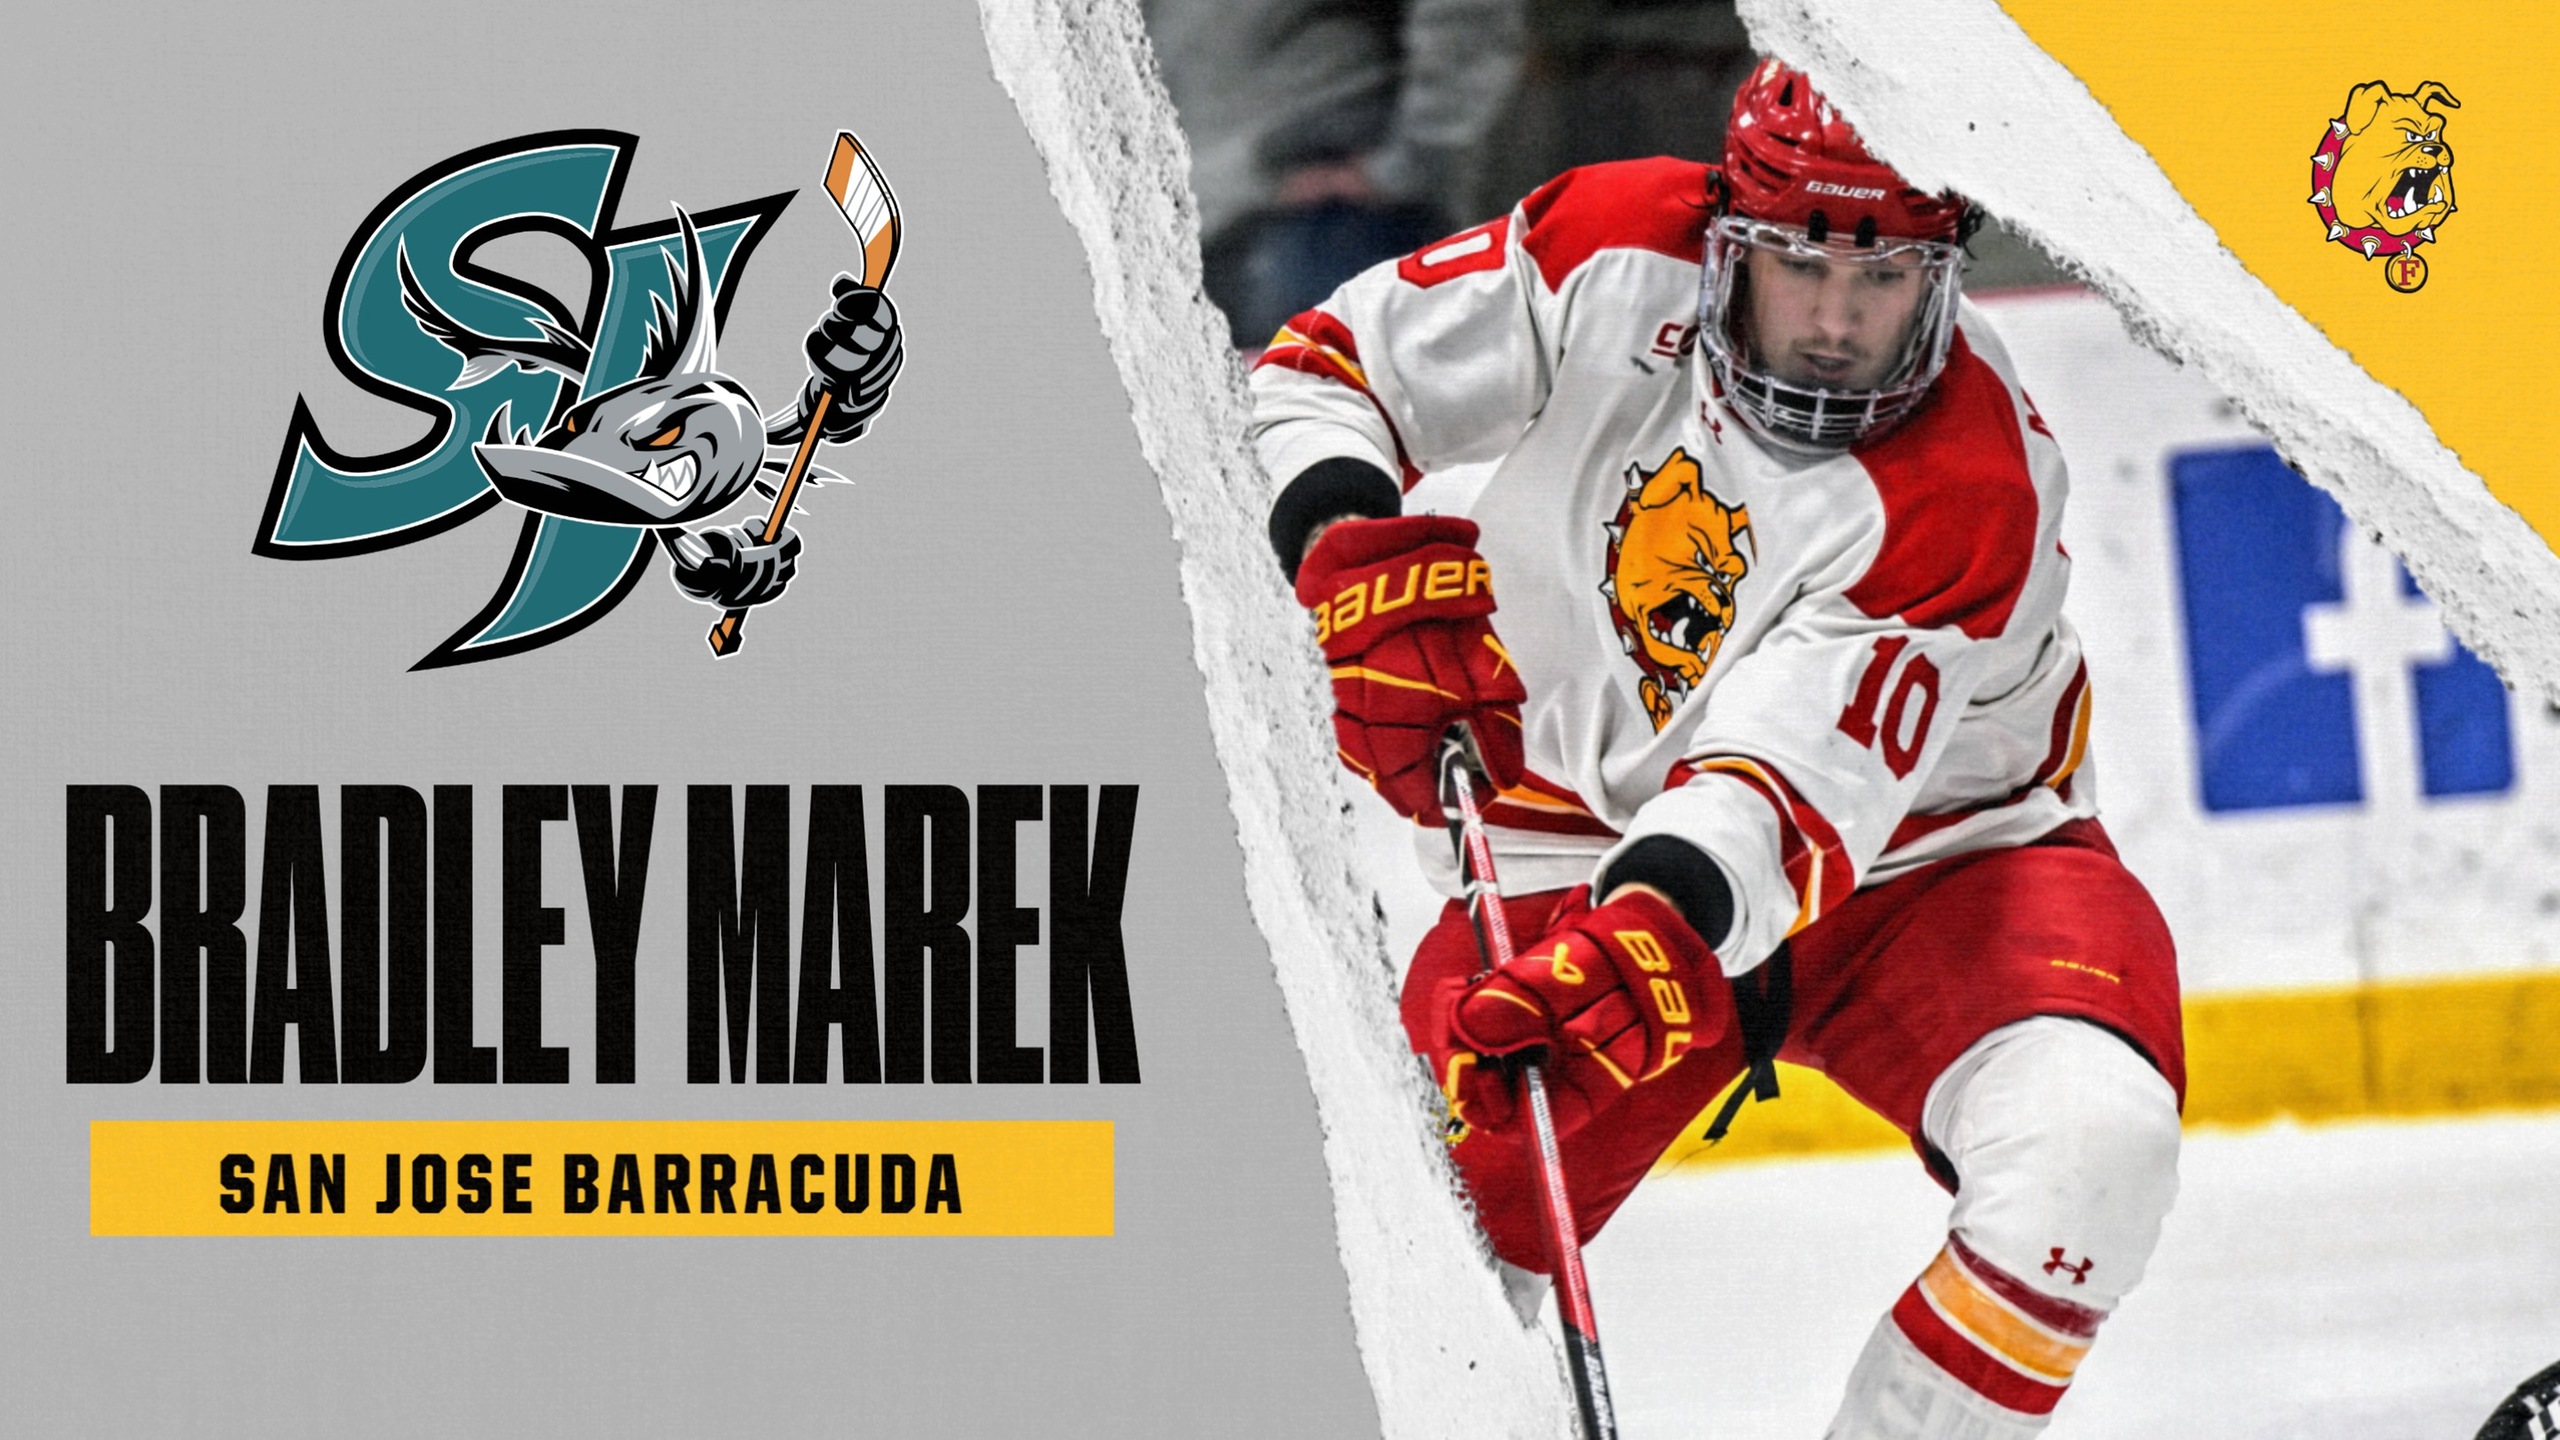 Ferris State's Bradley Marek Signs AHL Contract With San Jose Barracuda